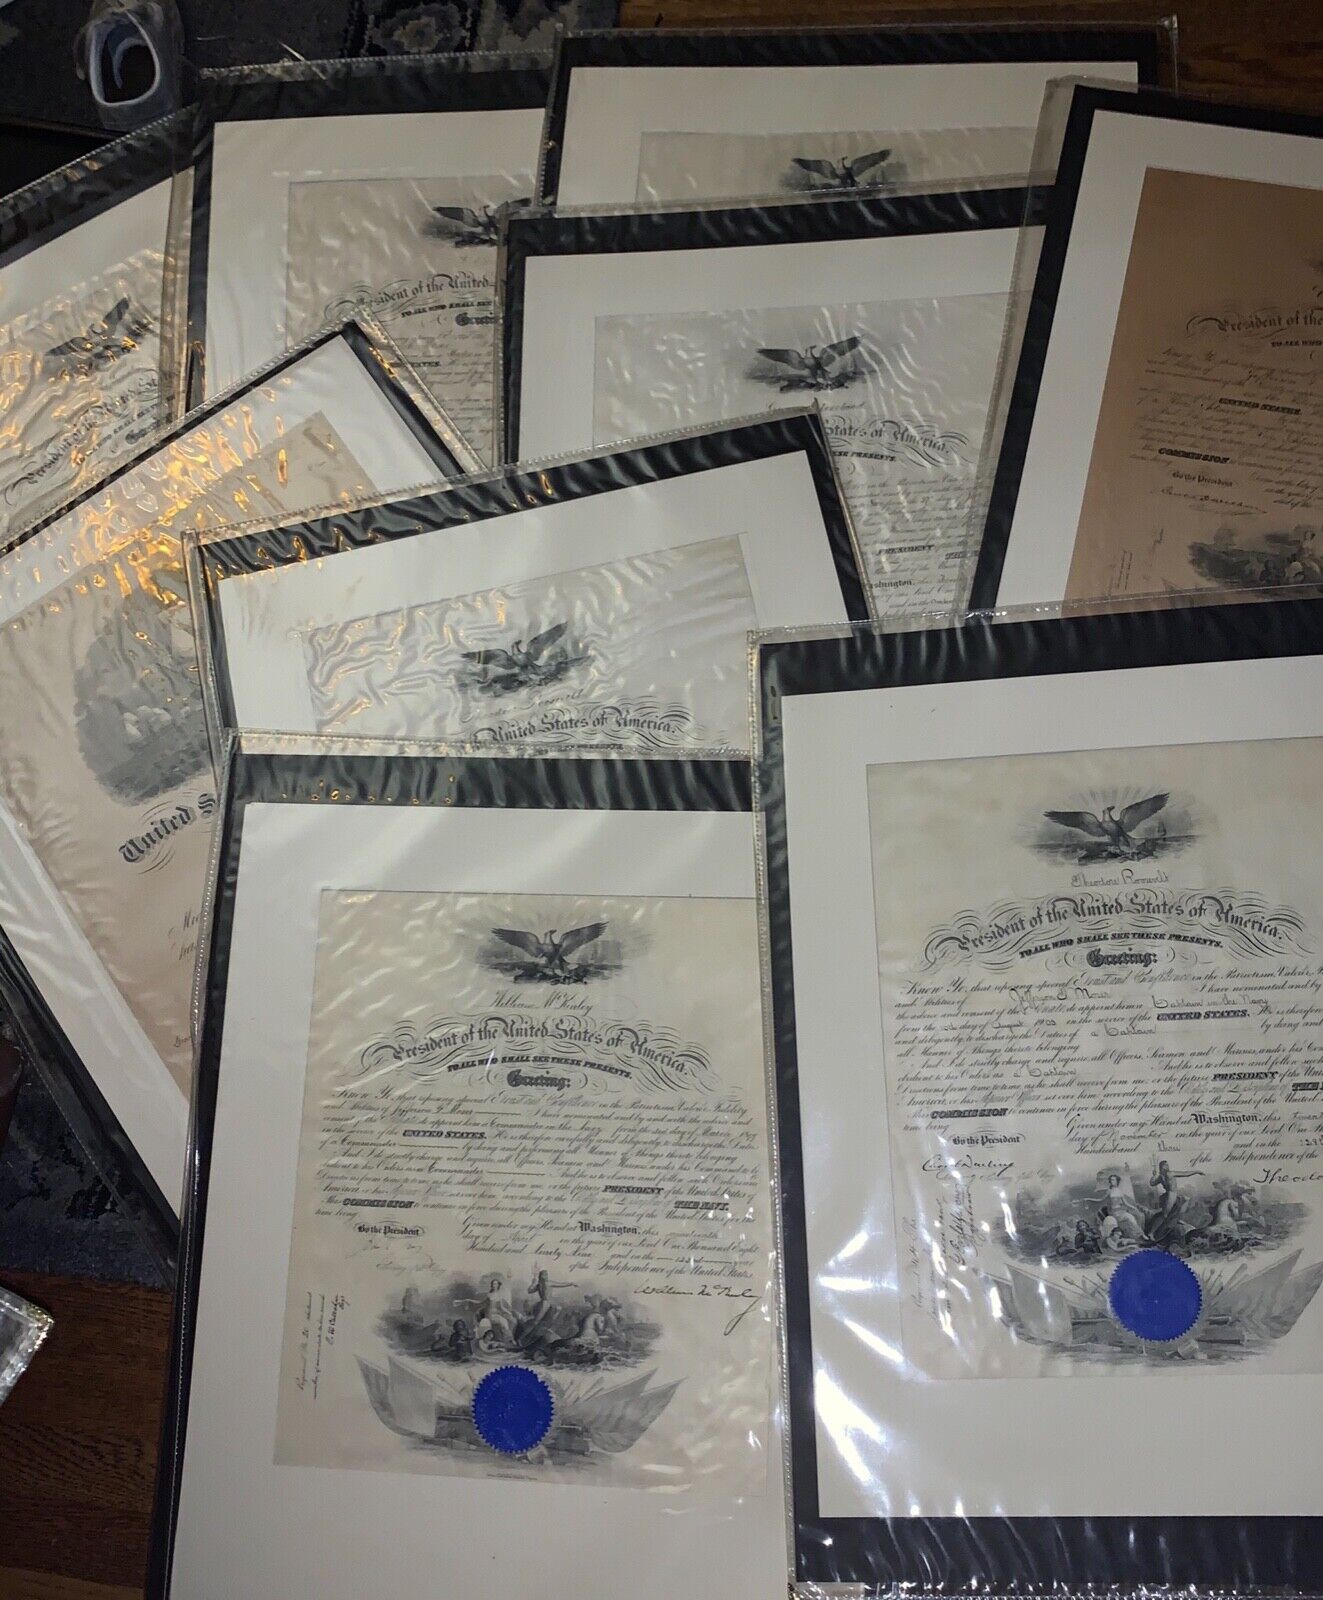 RARE USN ADMIRAL 8 NAVY COMMISSIONS CIVIL WAR TO WW1 US PRESIDENT AUTOGRAPHS